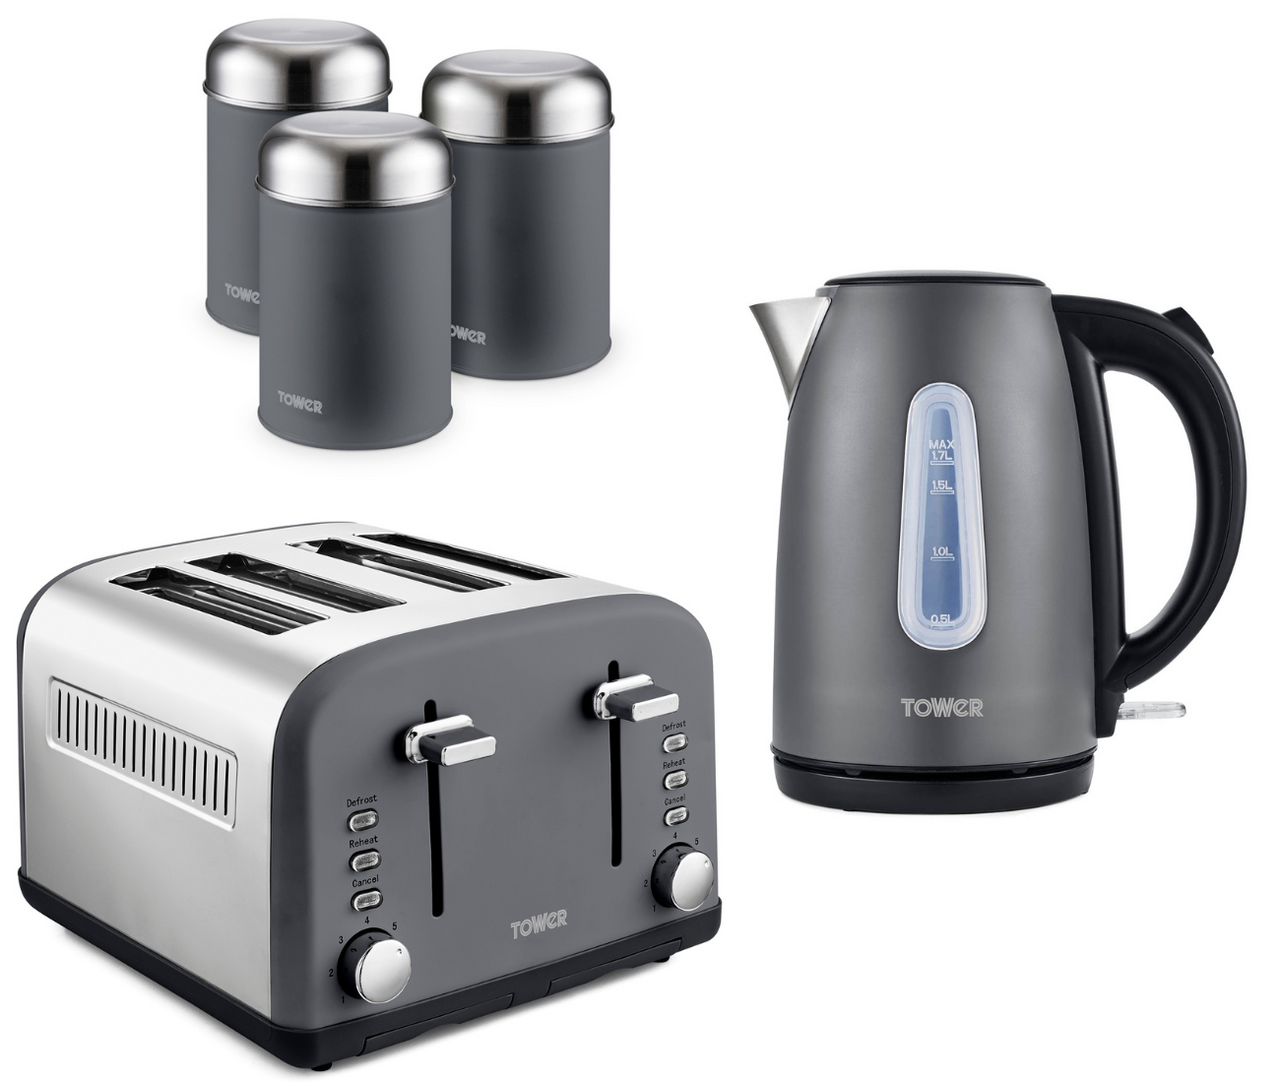 Tower Infinity Kettle 4 Slice Toaster & 3 Canisters Kitchen Set in Slate Grey